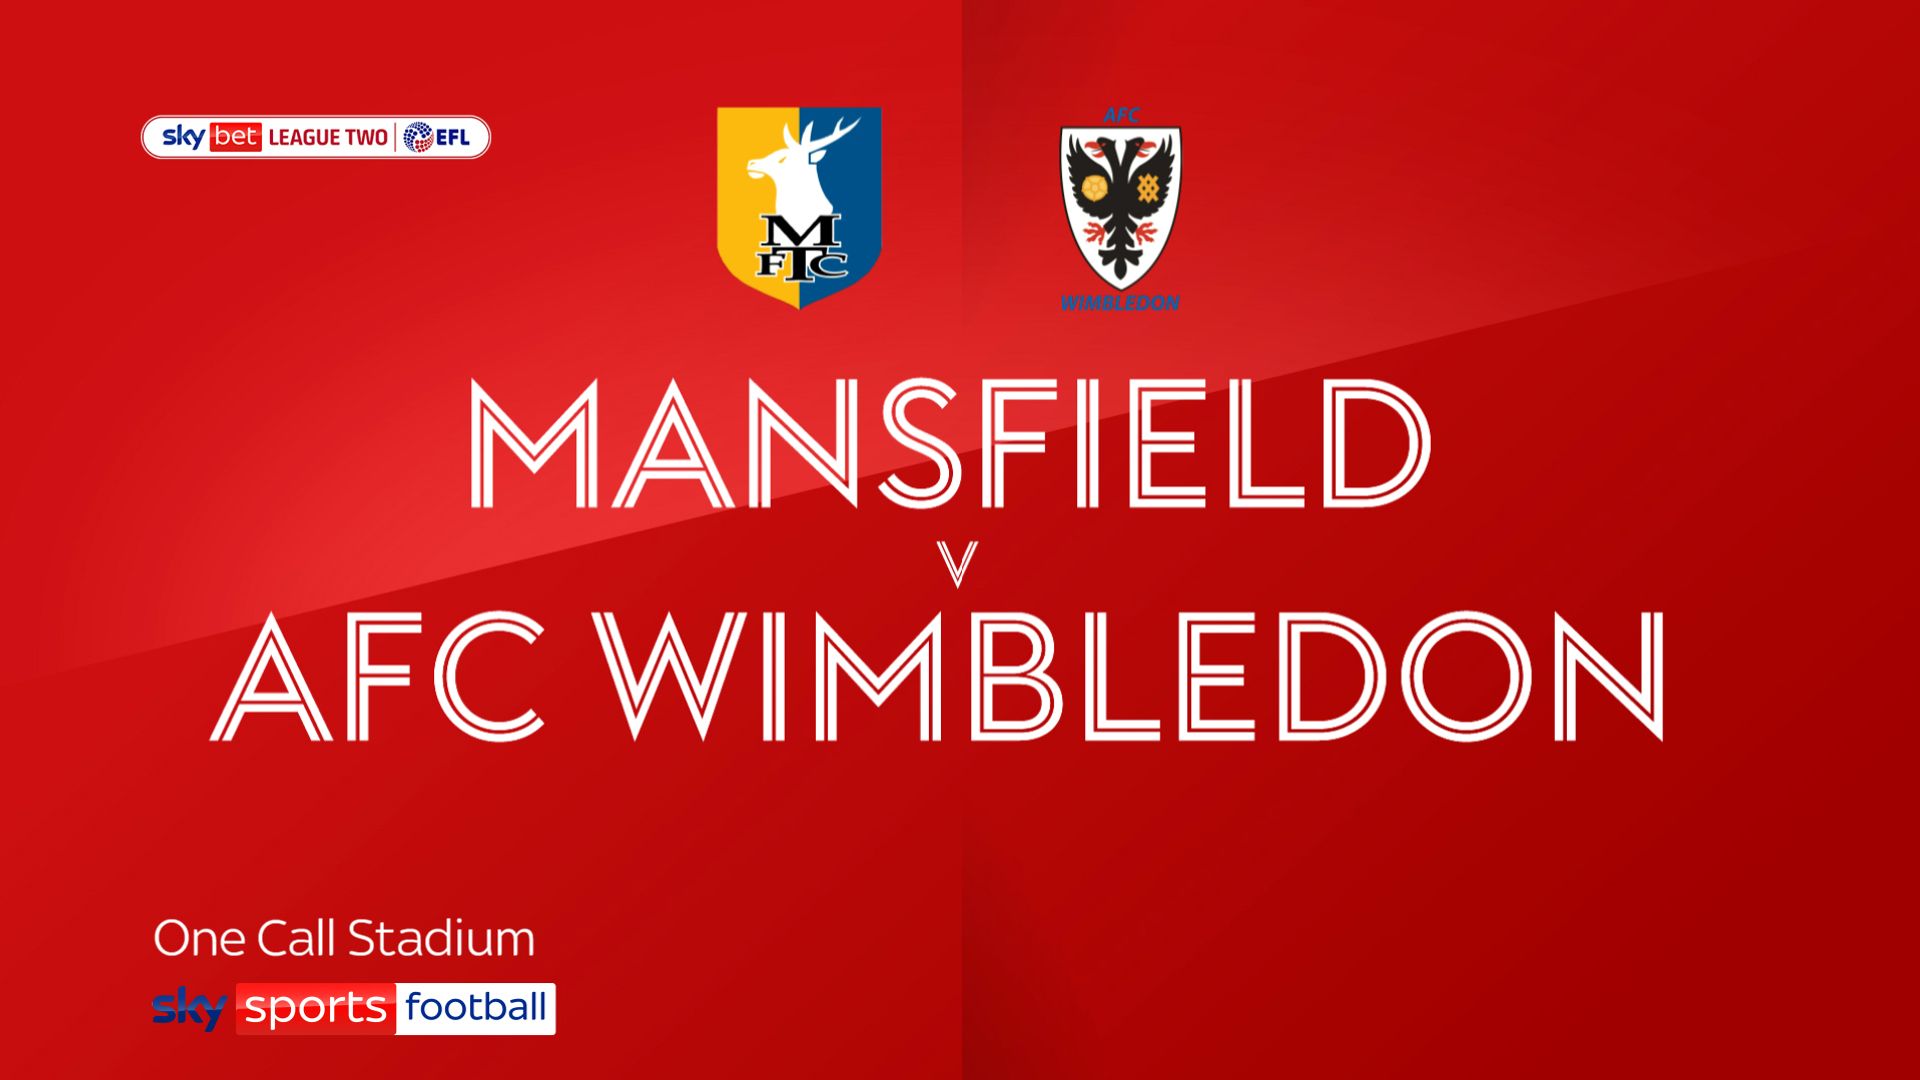 Mansfield fightback to see off 10-man Wimbledon in seven-goal thiller